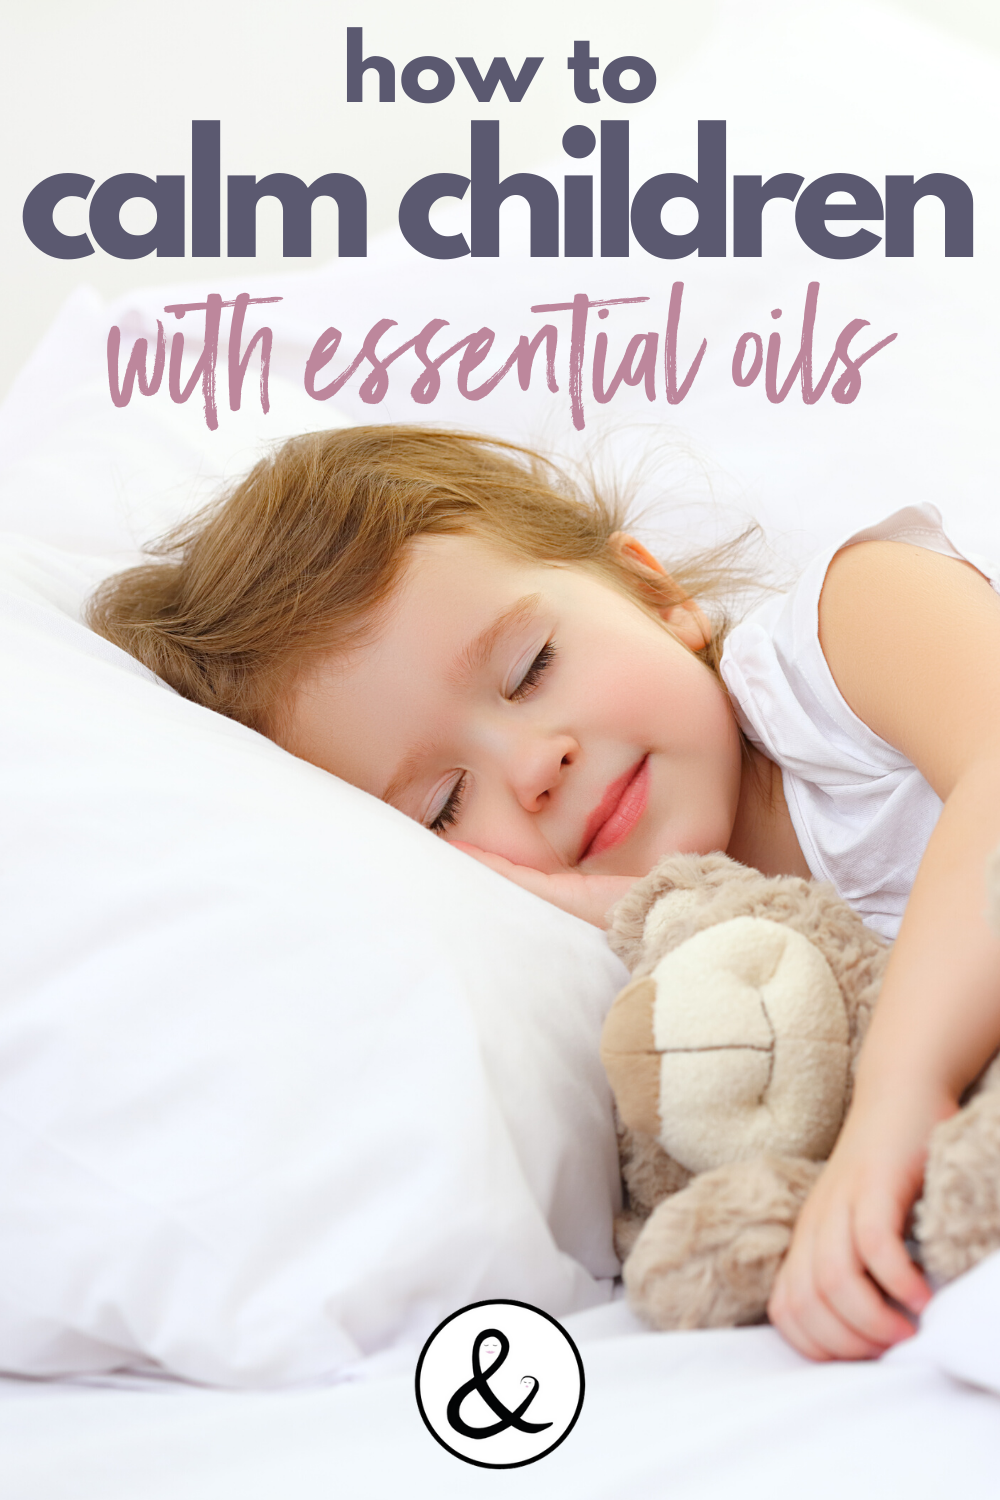 How to Calm Children with Essential Oils